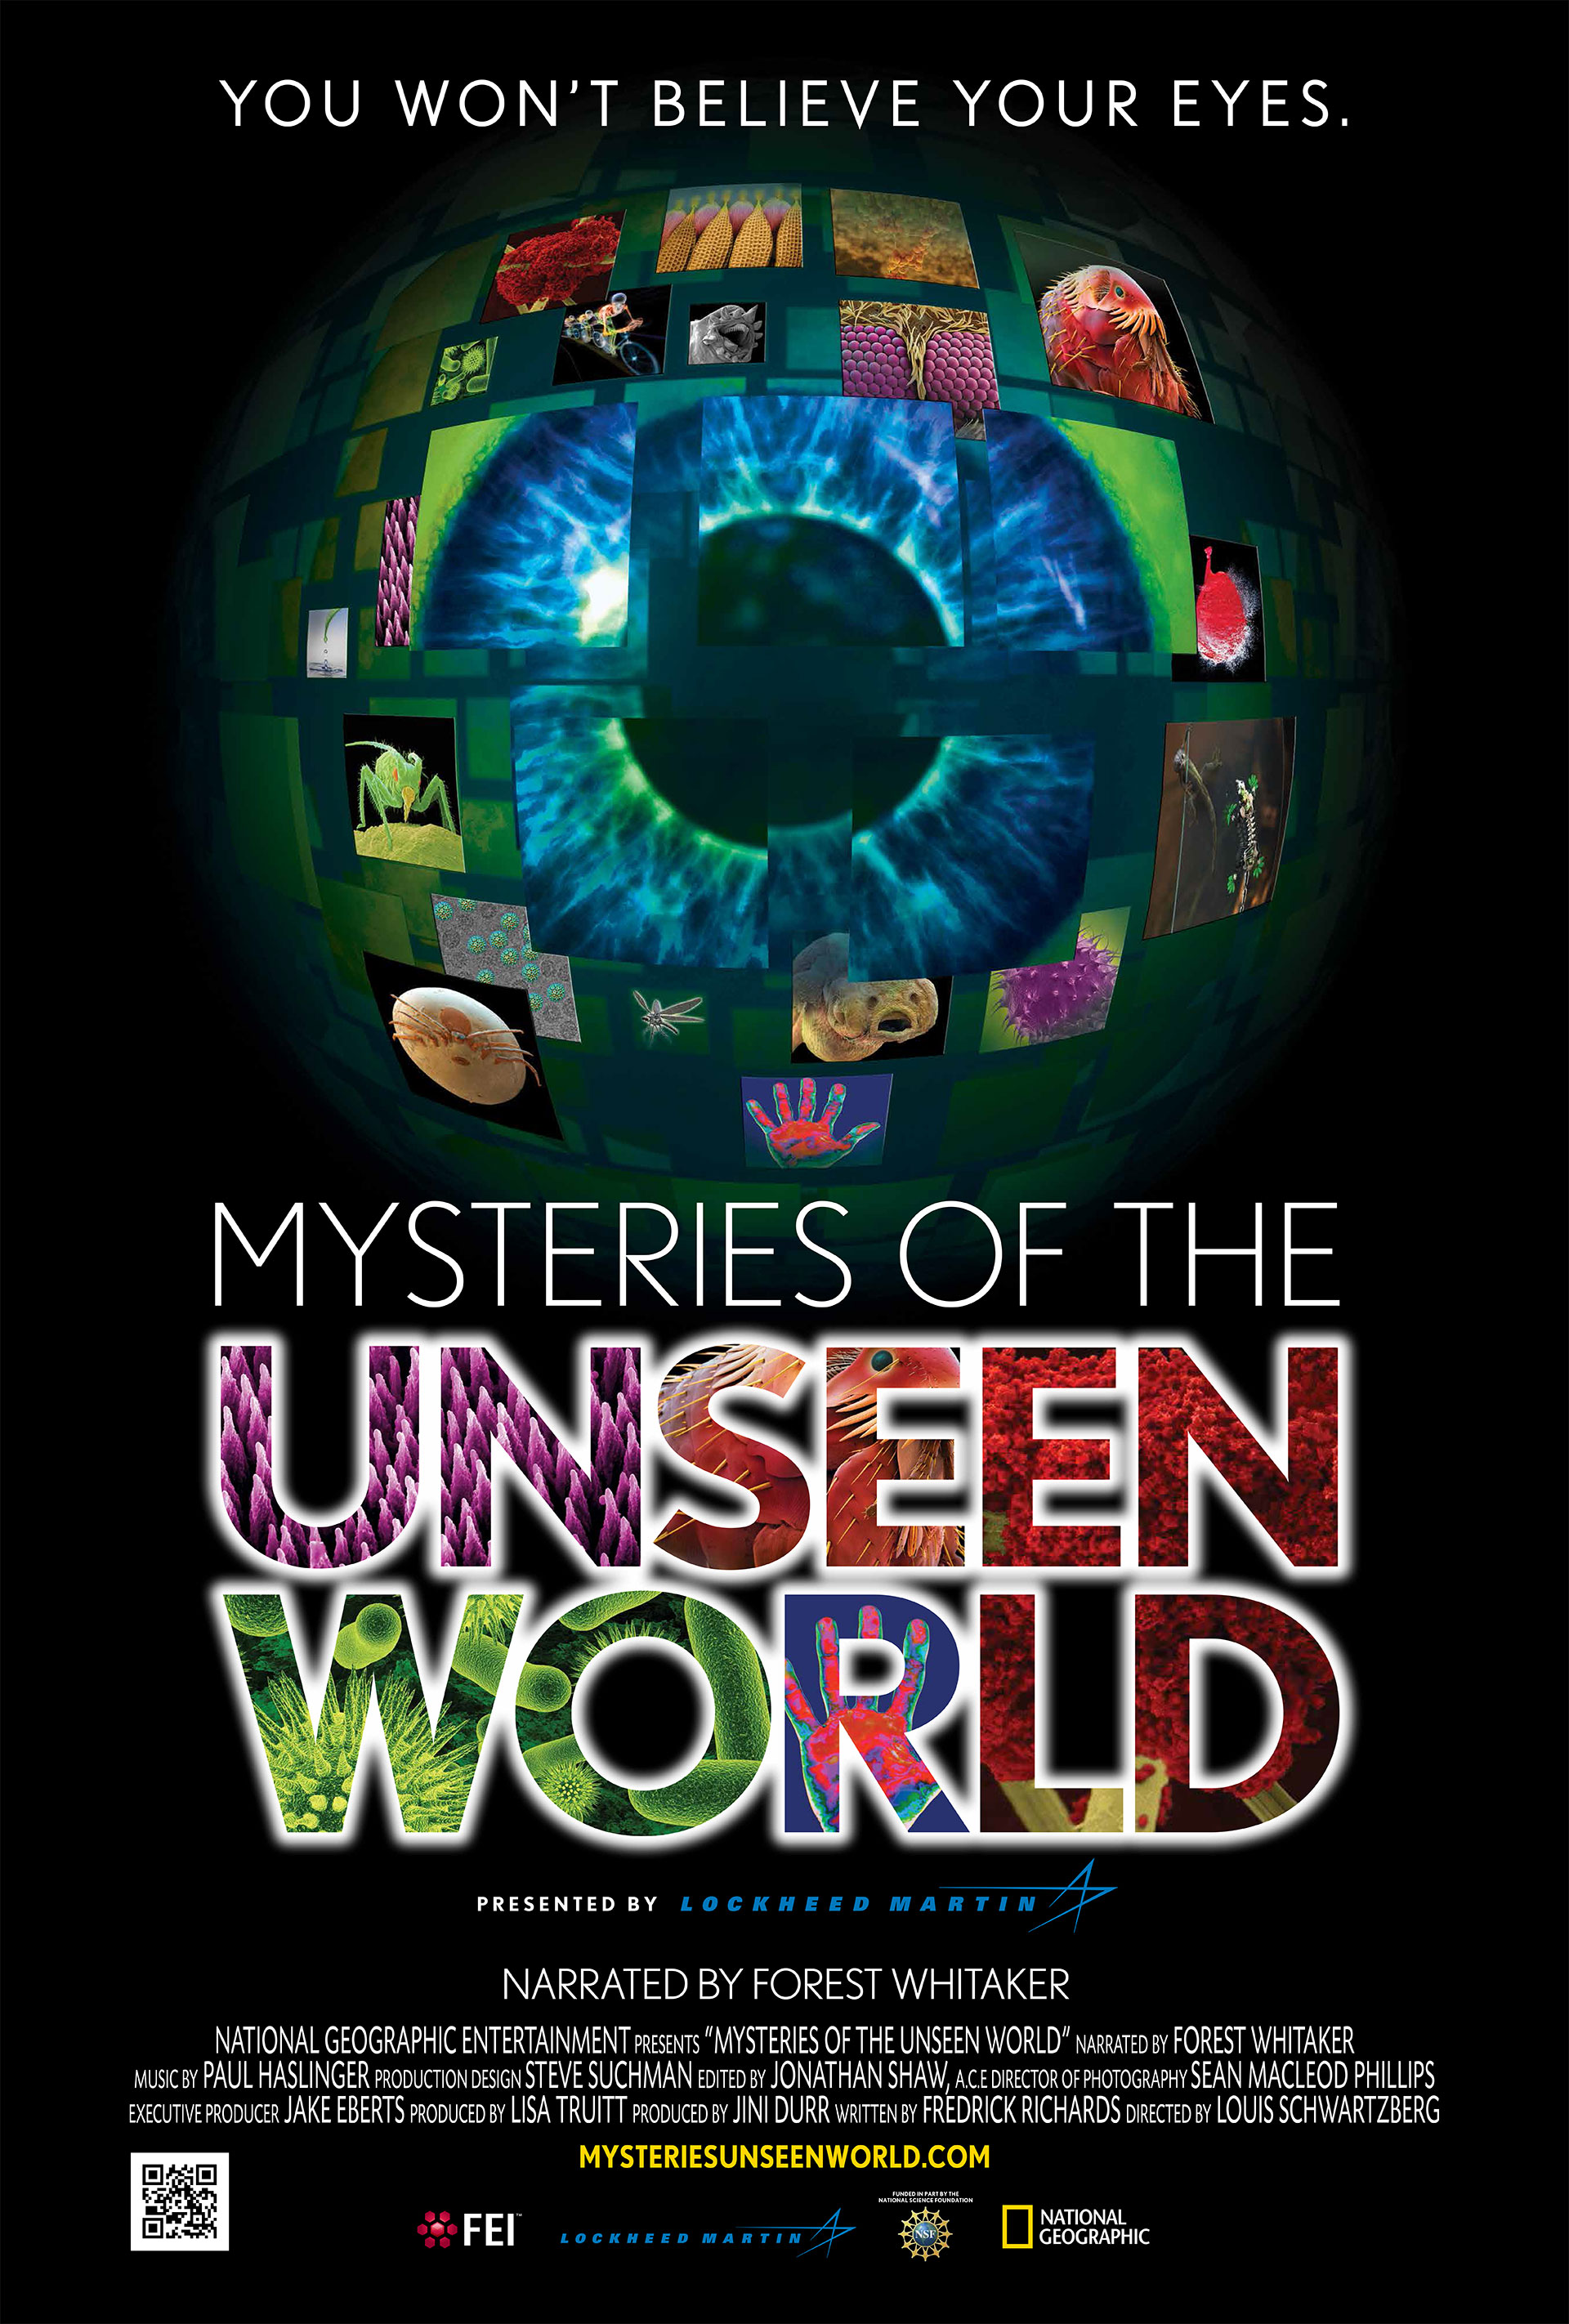 MYSTERIES OF THE UNSEEN WORLD